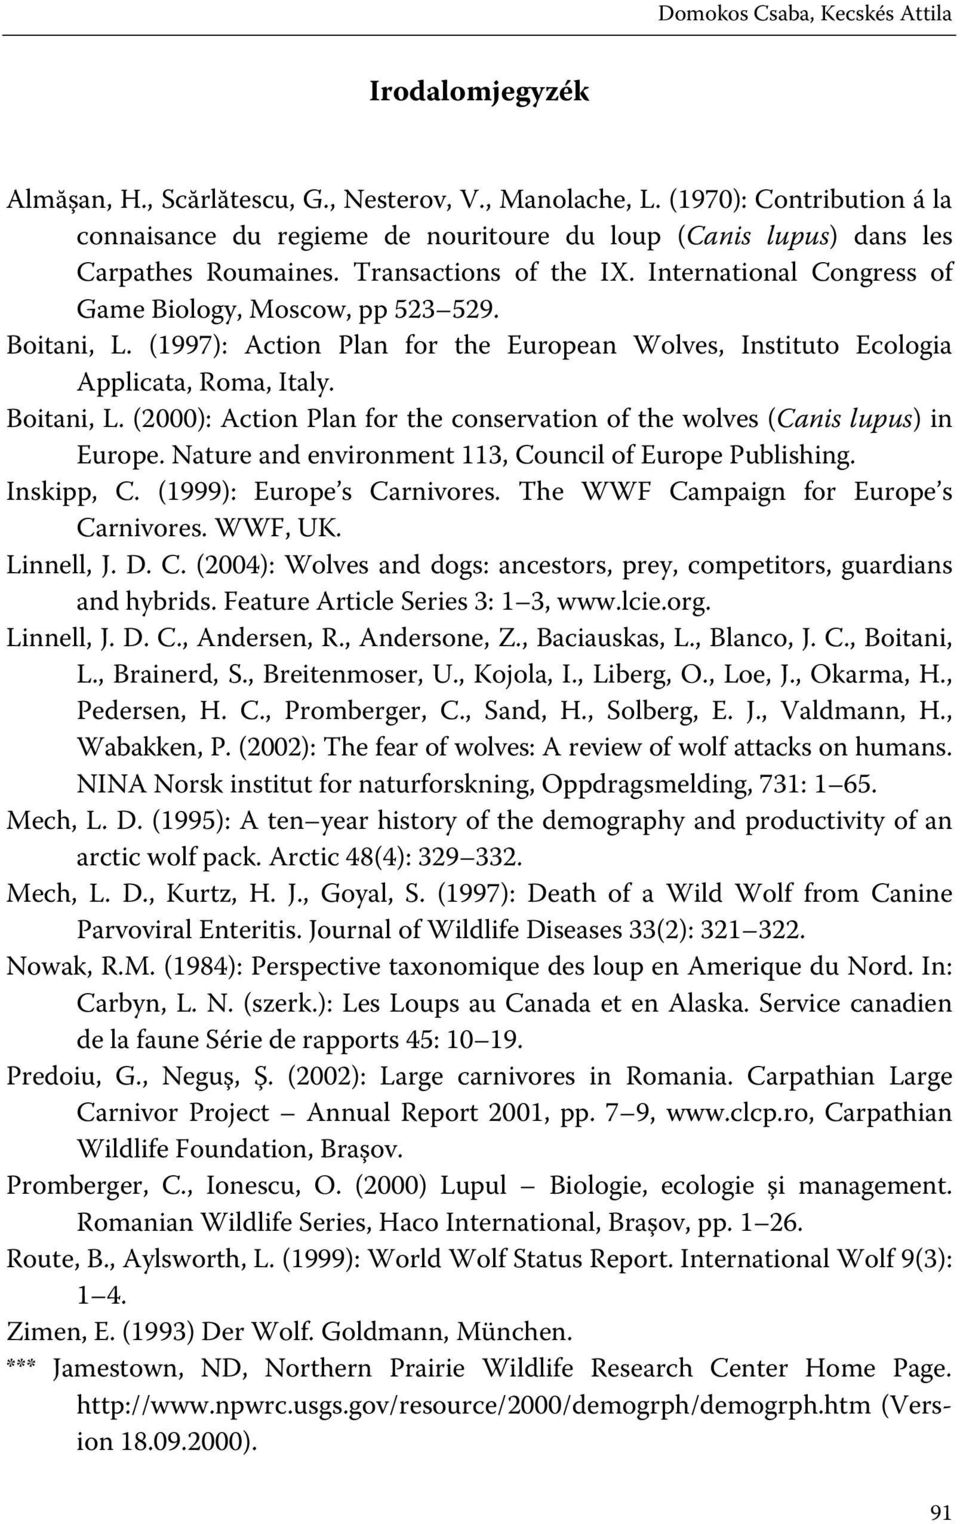 Nature and environment 113, Council of Europe Publishing. Inskipp, C. (1999): Europe s Carnivores. The WWF Campaign for Europe s Carnivores. WWF, UK. Linnell, J. D. C. (2004): Wolves and dogs: ancestors, prey, competitors, guardians and hybrids.